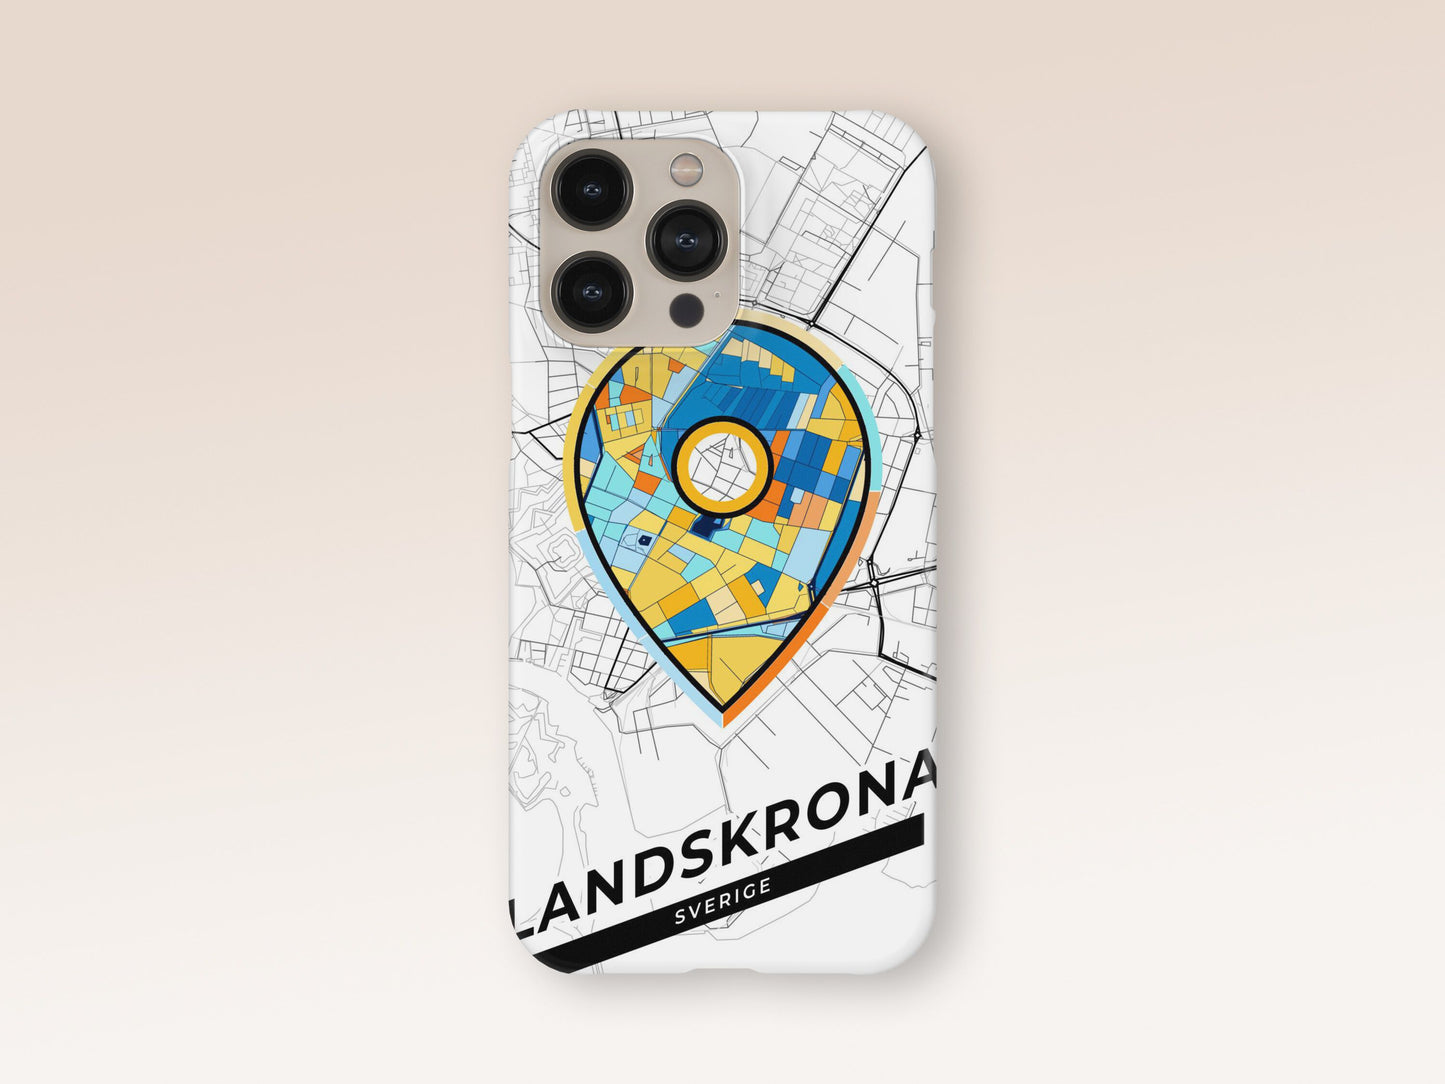 Landskrona Sweden slim phone case with colorful icon. Birthday, wedding or housewarming gift. Couple match cases. 1